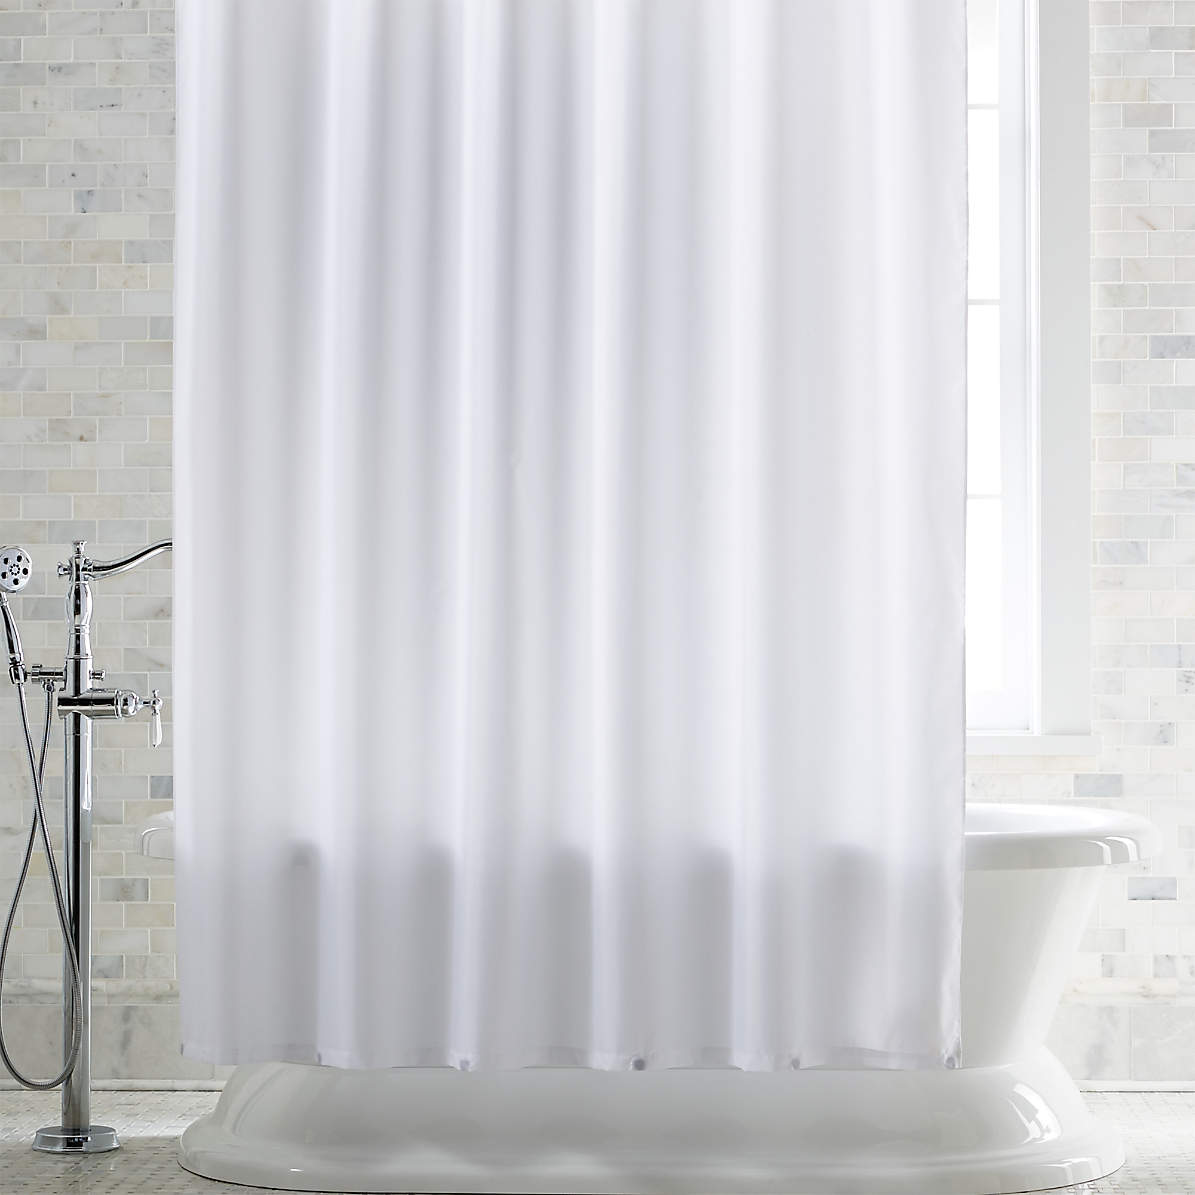 White Shower Curtain Liner With Magnets, How To Clean Fabric Shower Curtain Liner